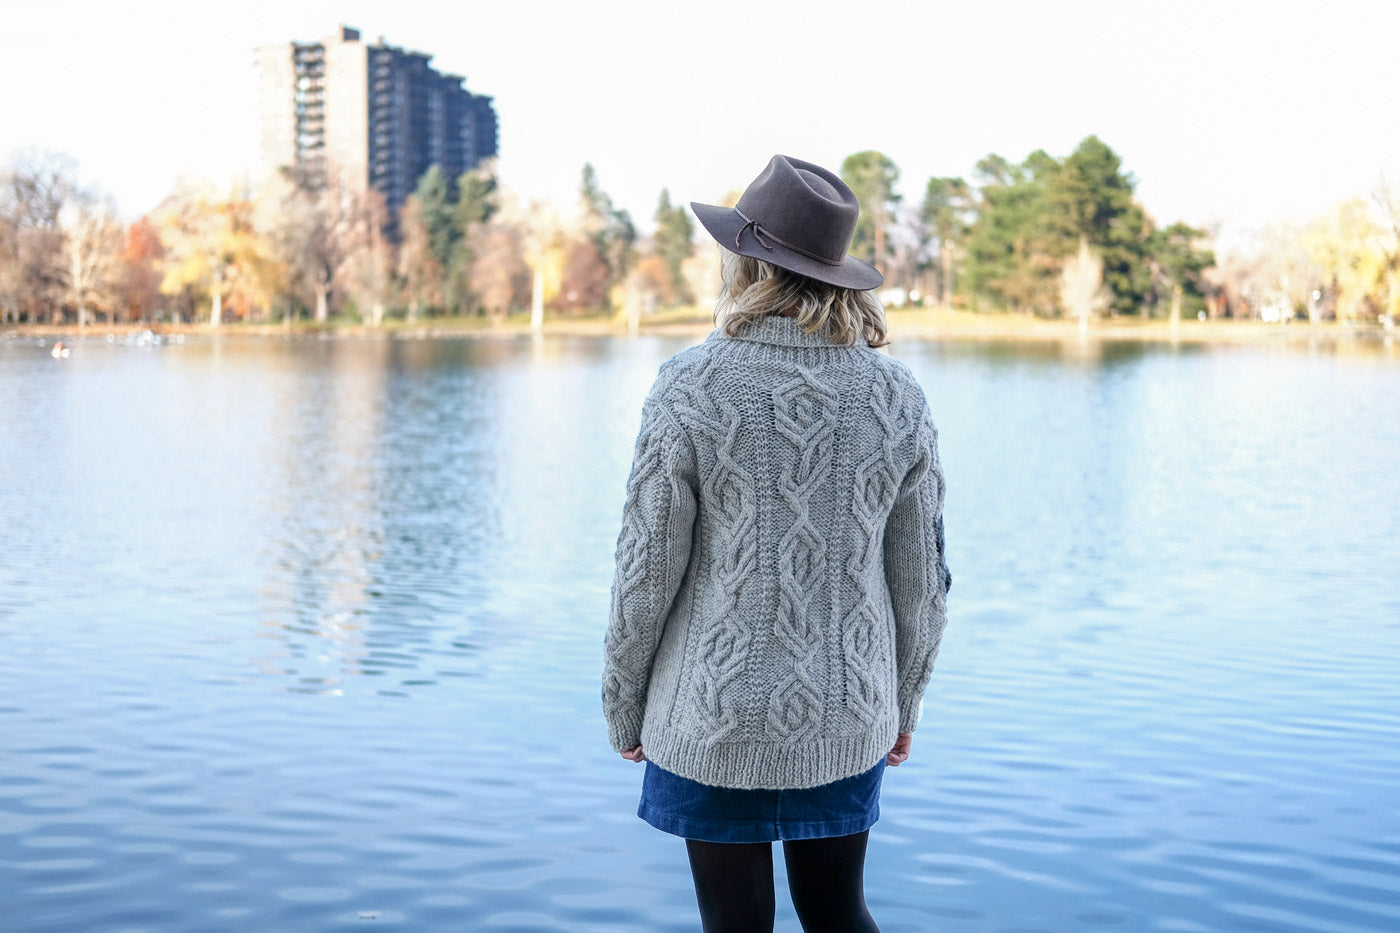 Amber looking out over a lake showing off the back side of her cabled cardigan